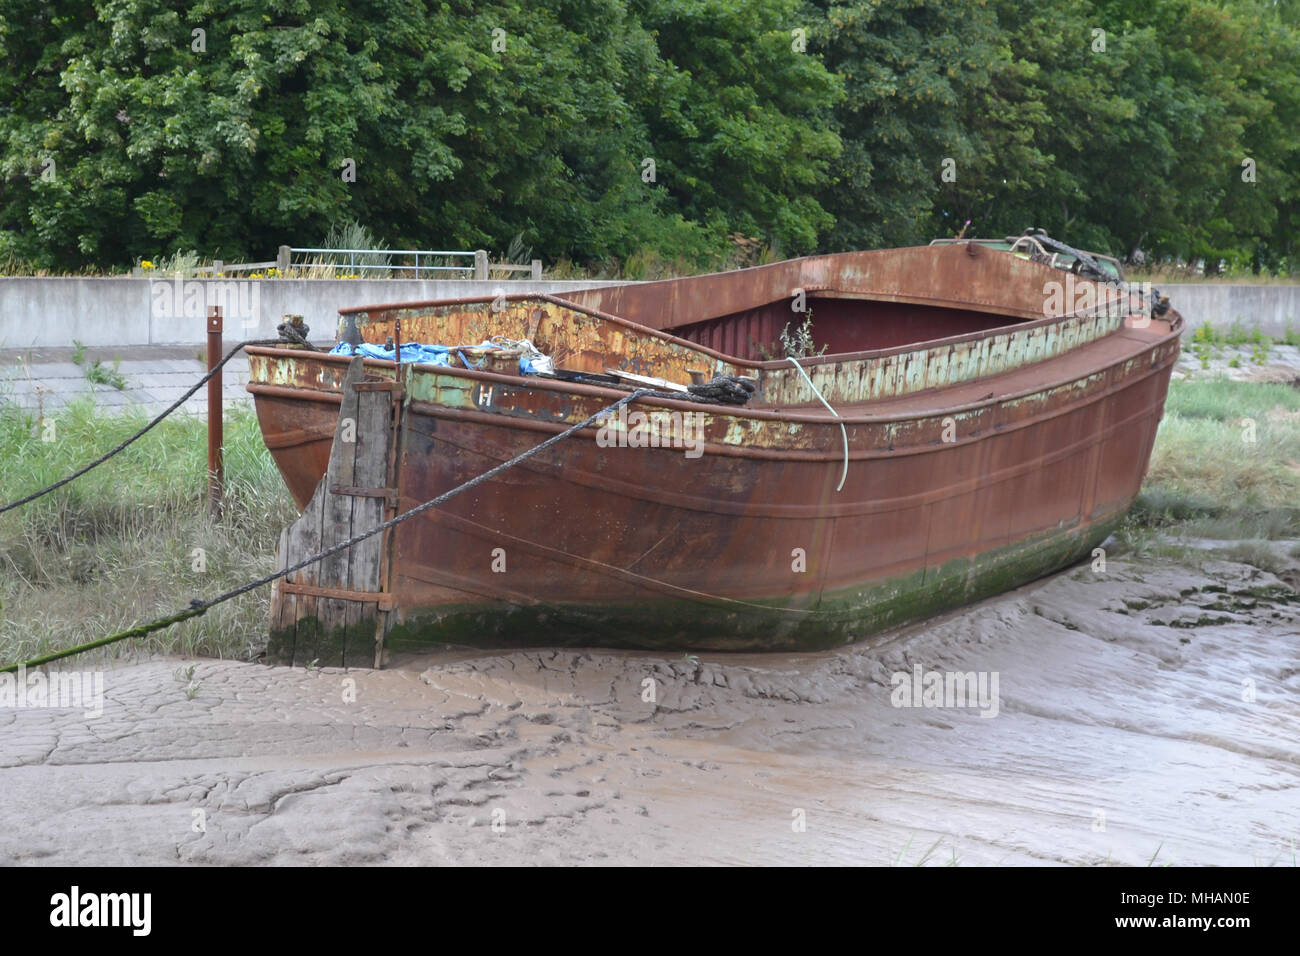 An image of a long forgotten boat that has now rusted Stock Photo